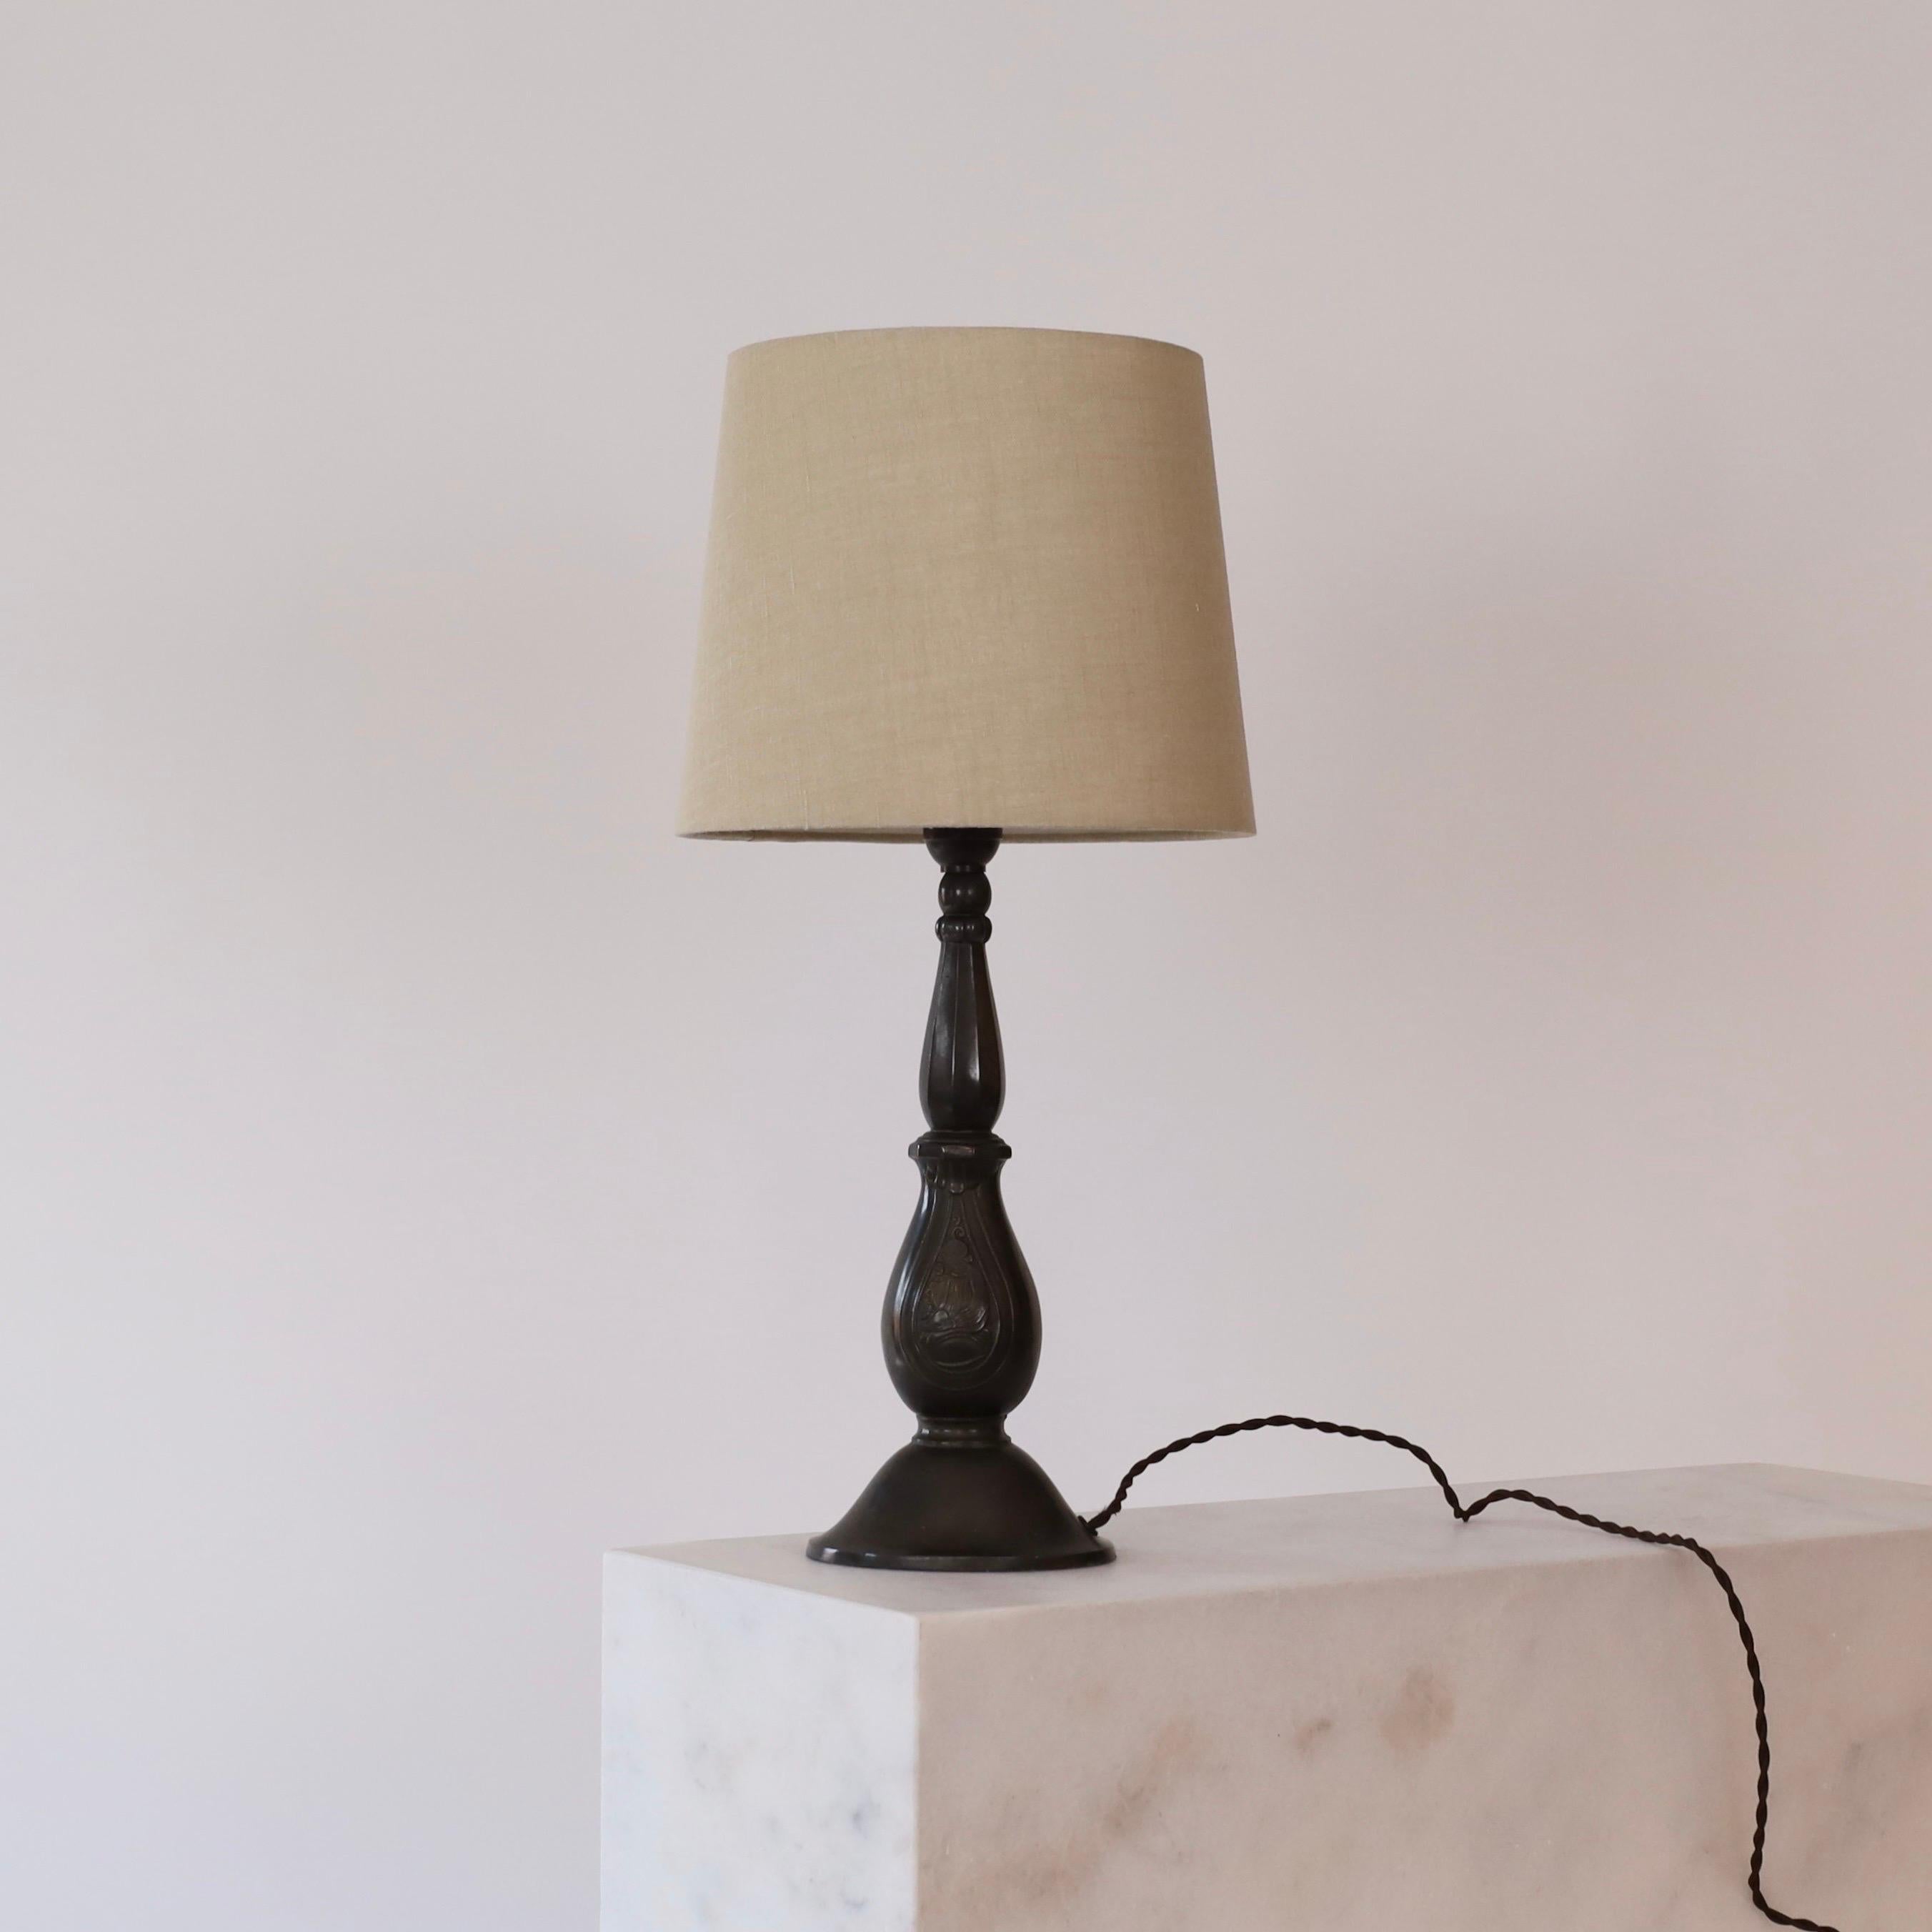 Just Andersen Table Lamp, 1920s, Denmark For Sale 5